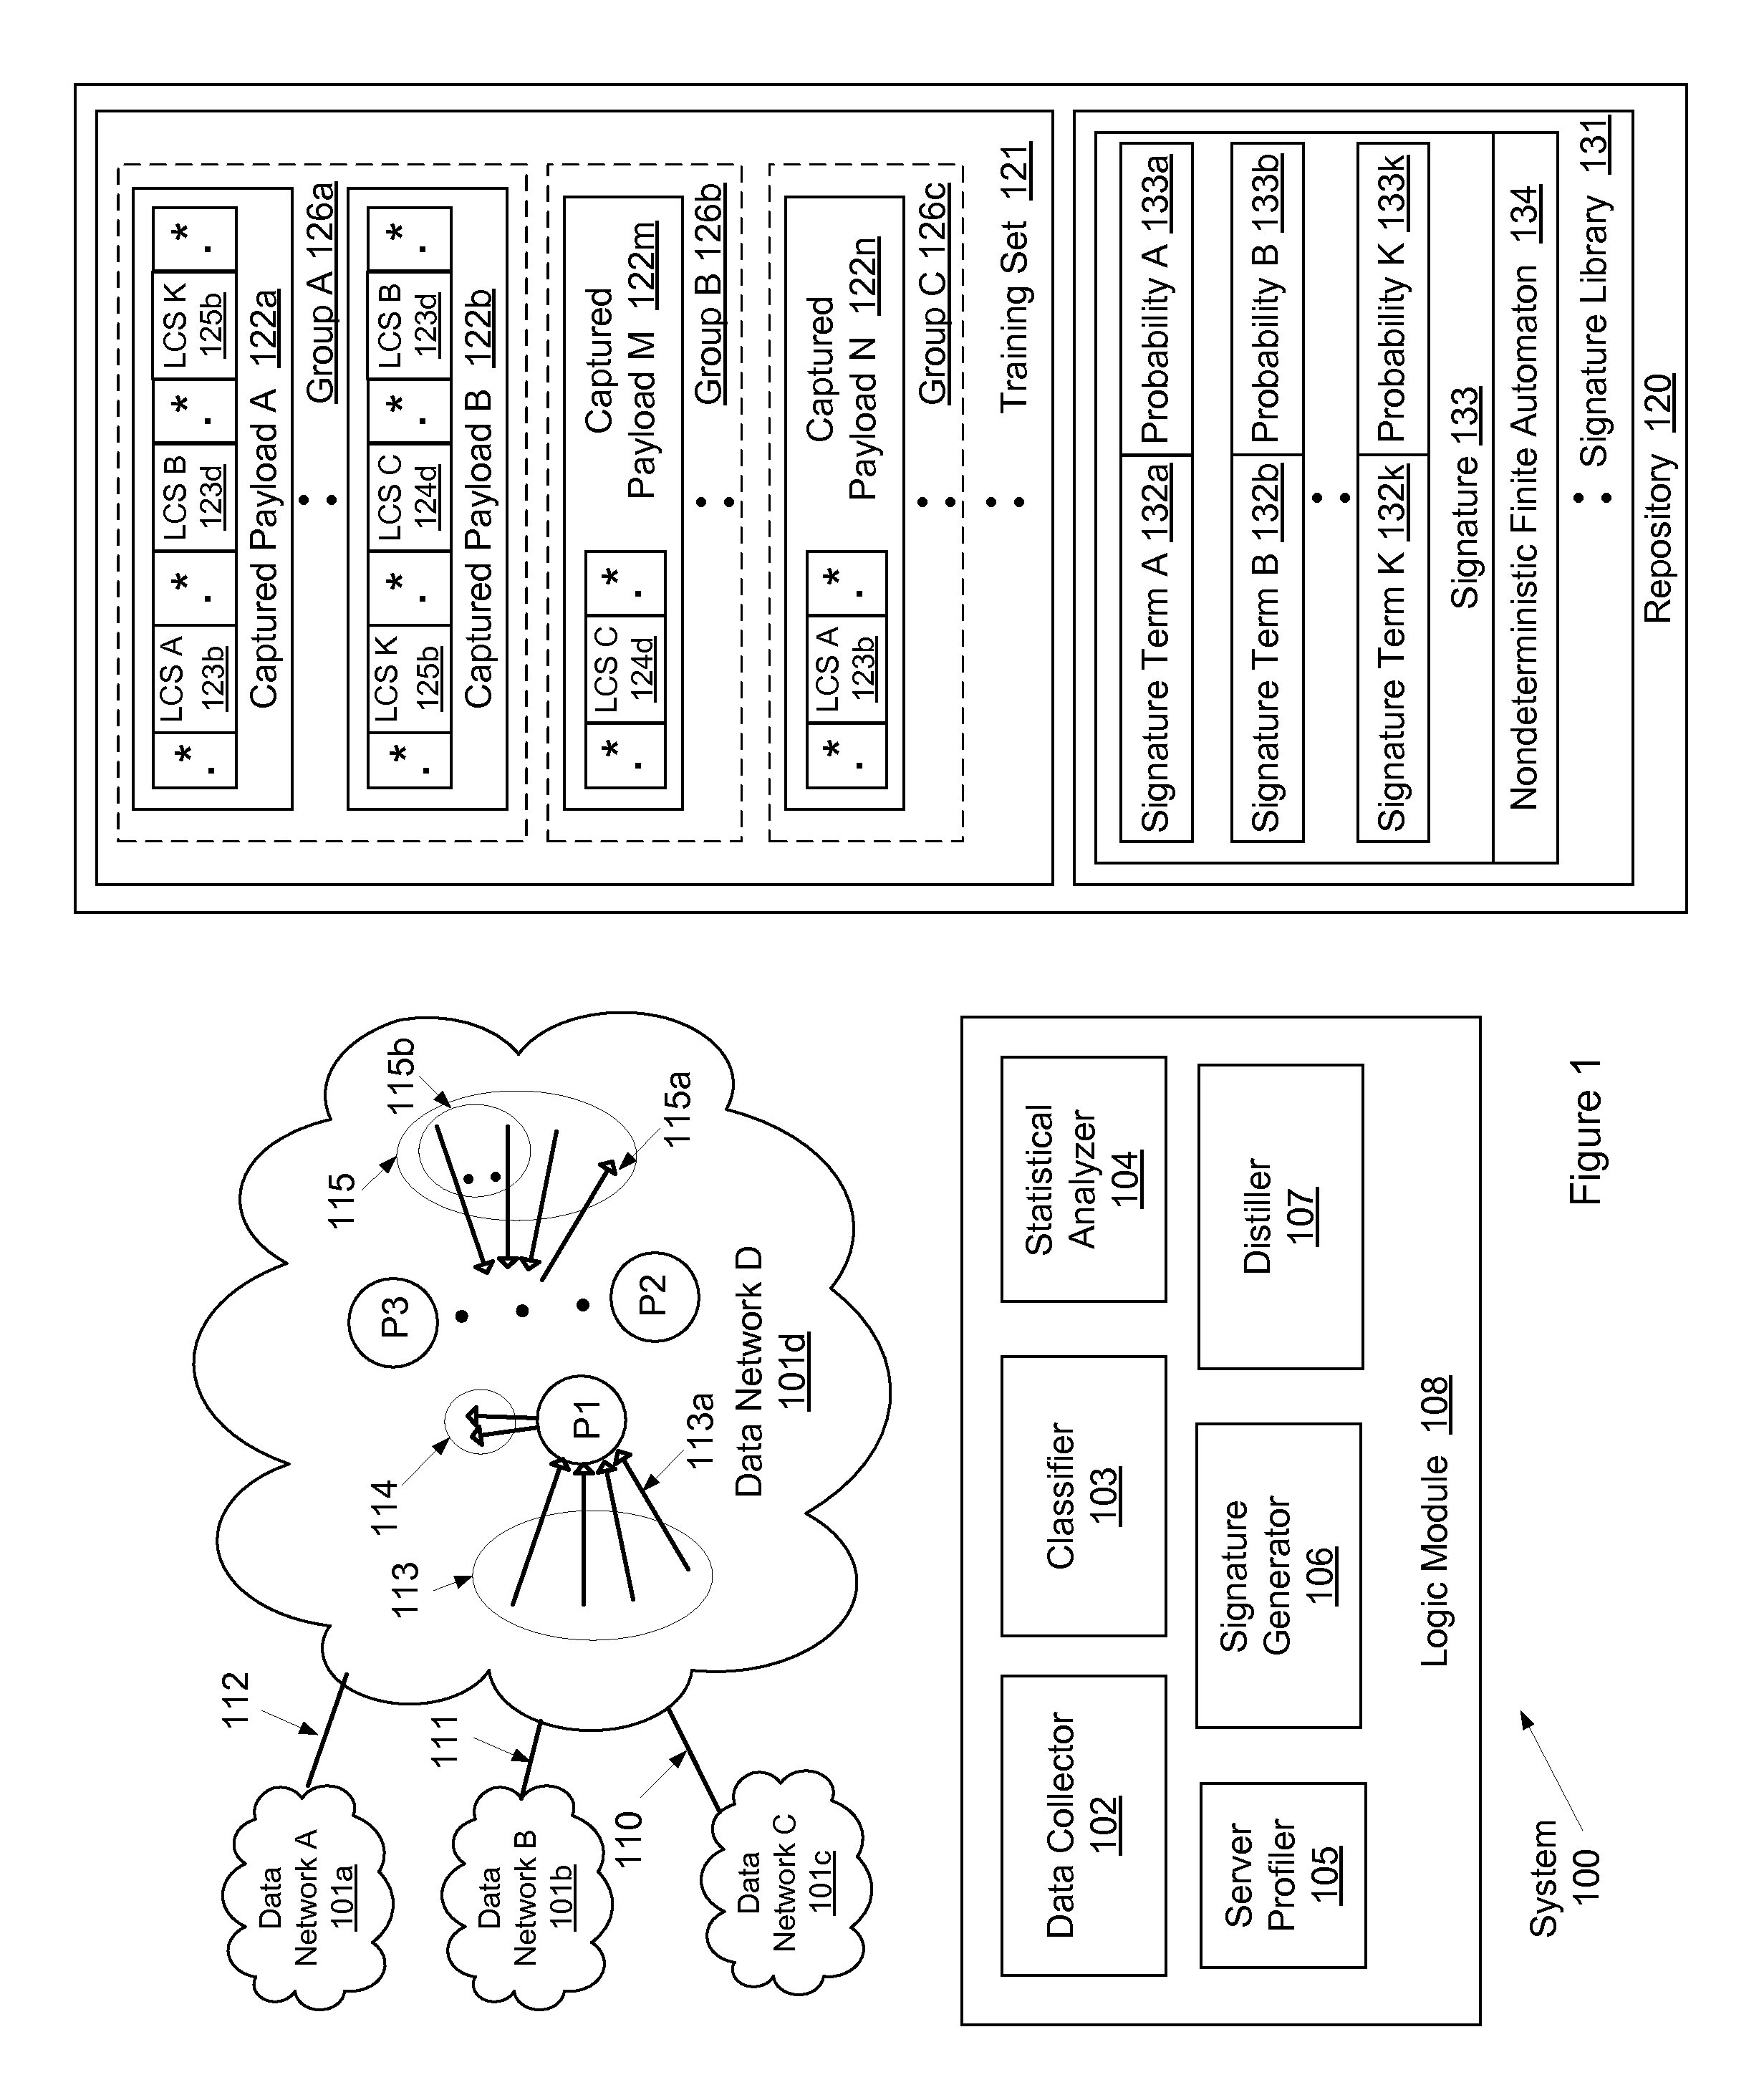 System and method for determining network application signatures using flow payloads